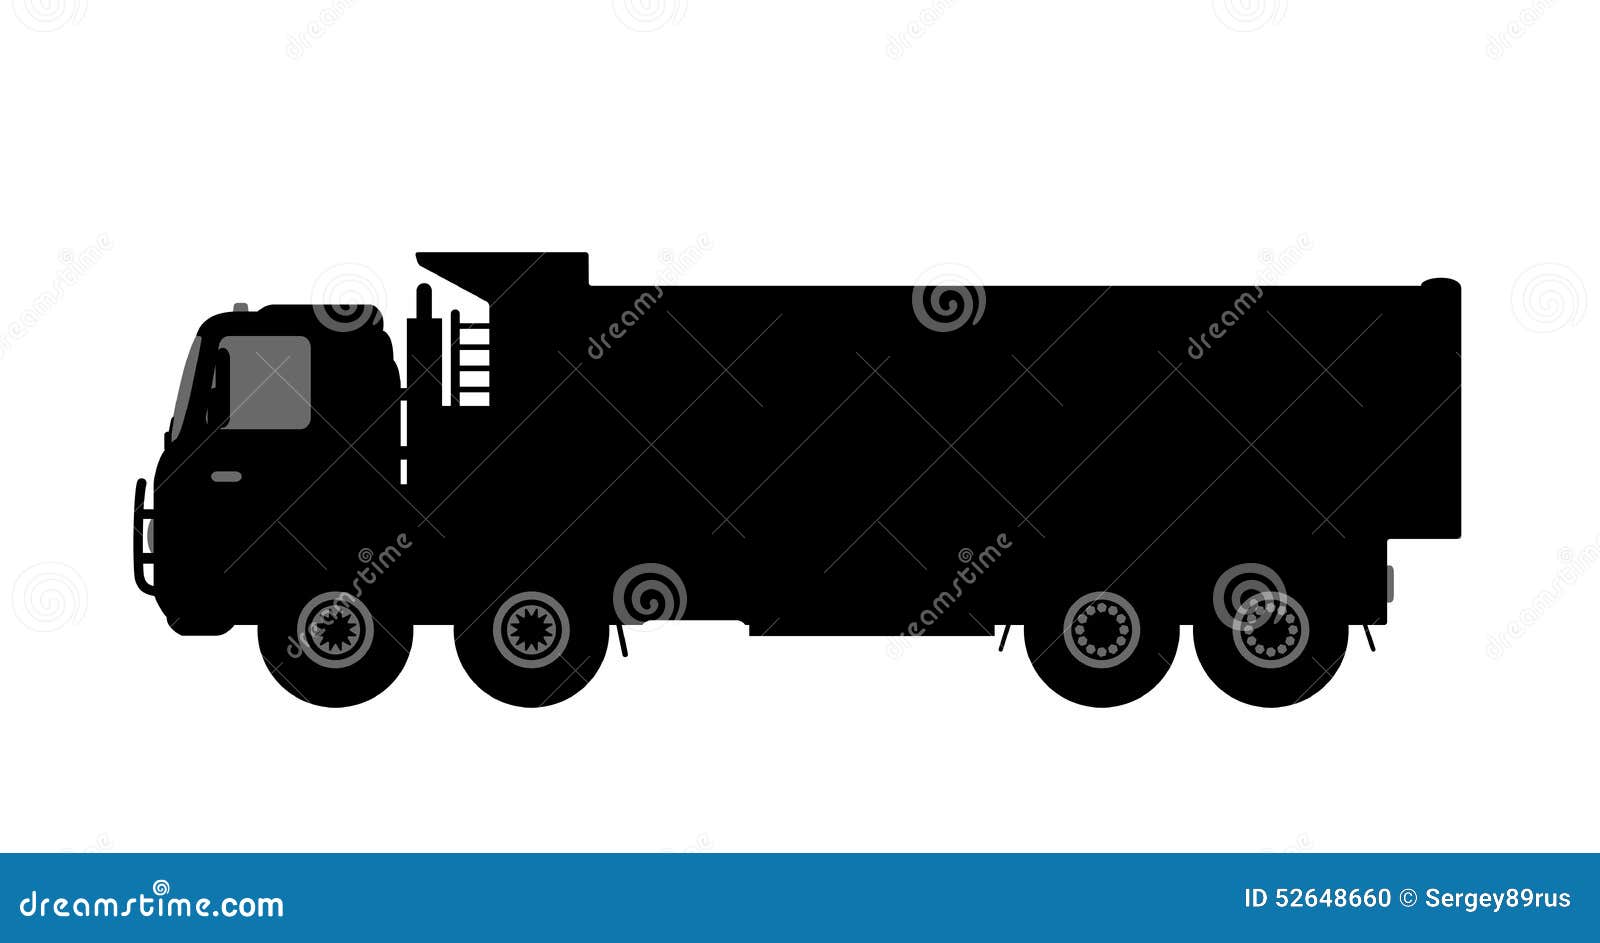 Download Silhouette Of A Dump Truck On White Background. Stock ...